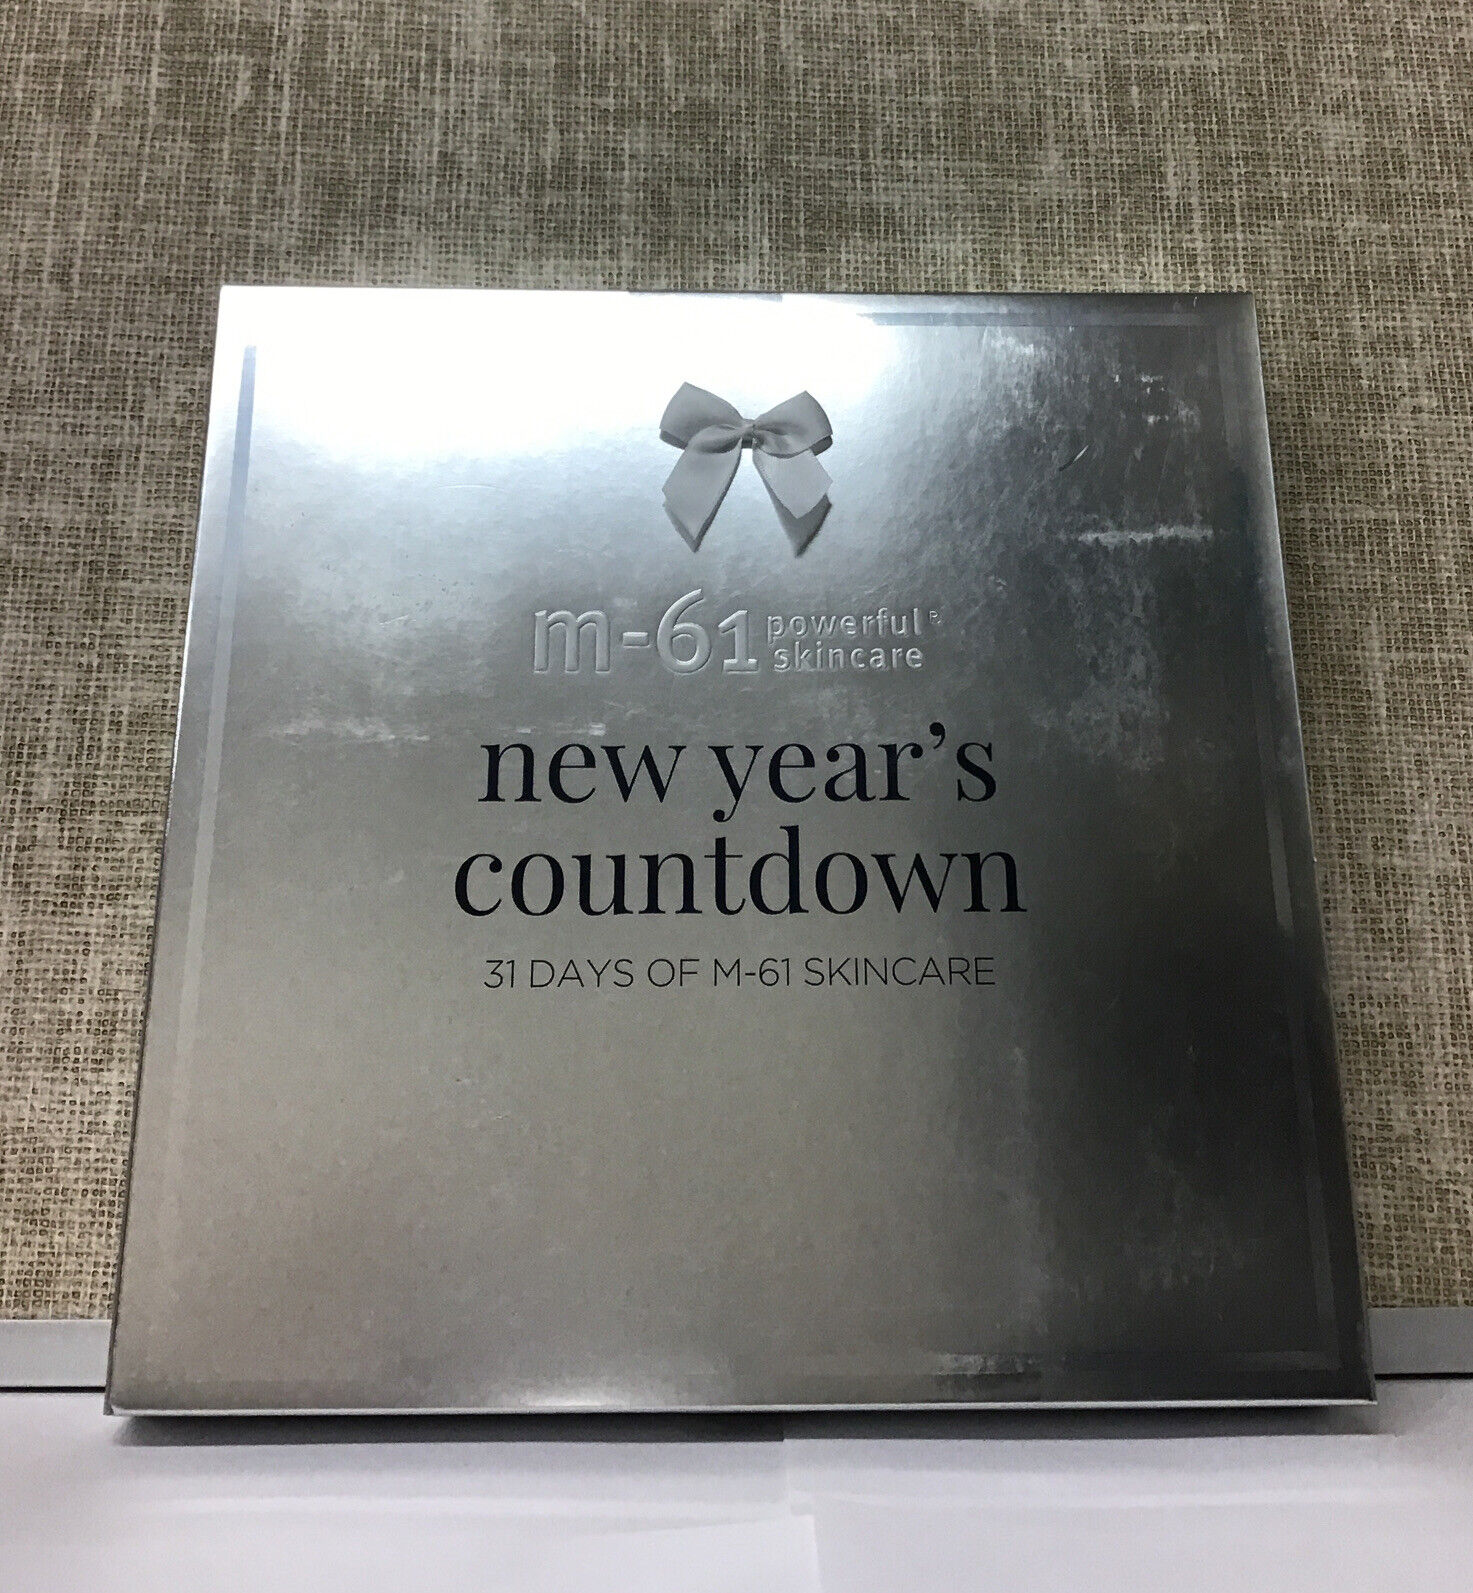 m-61 Powerful Skincare New Year’s Countdown 31 Days Of M-61 Skincare,As pictured